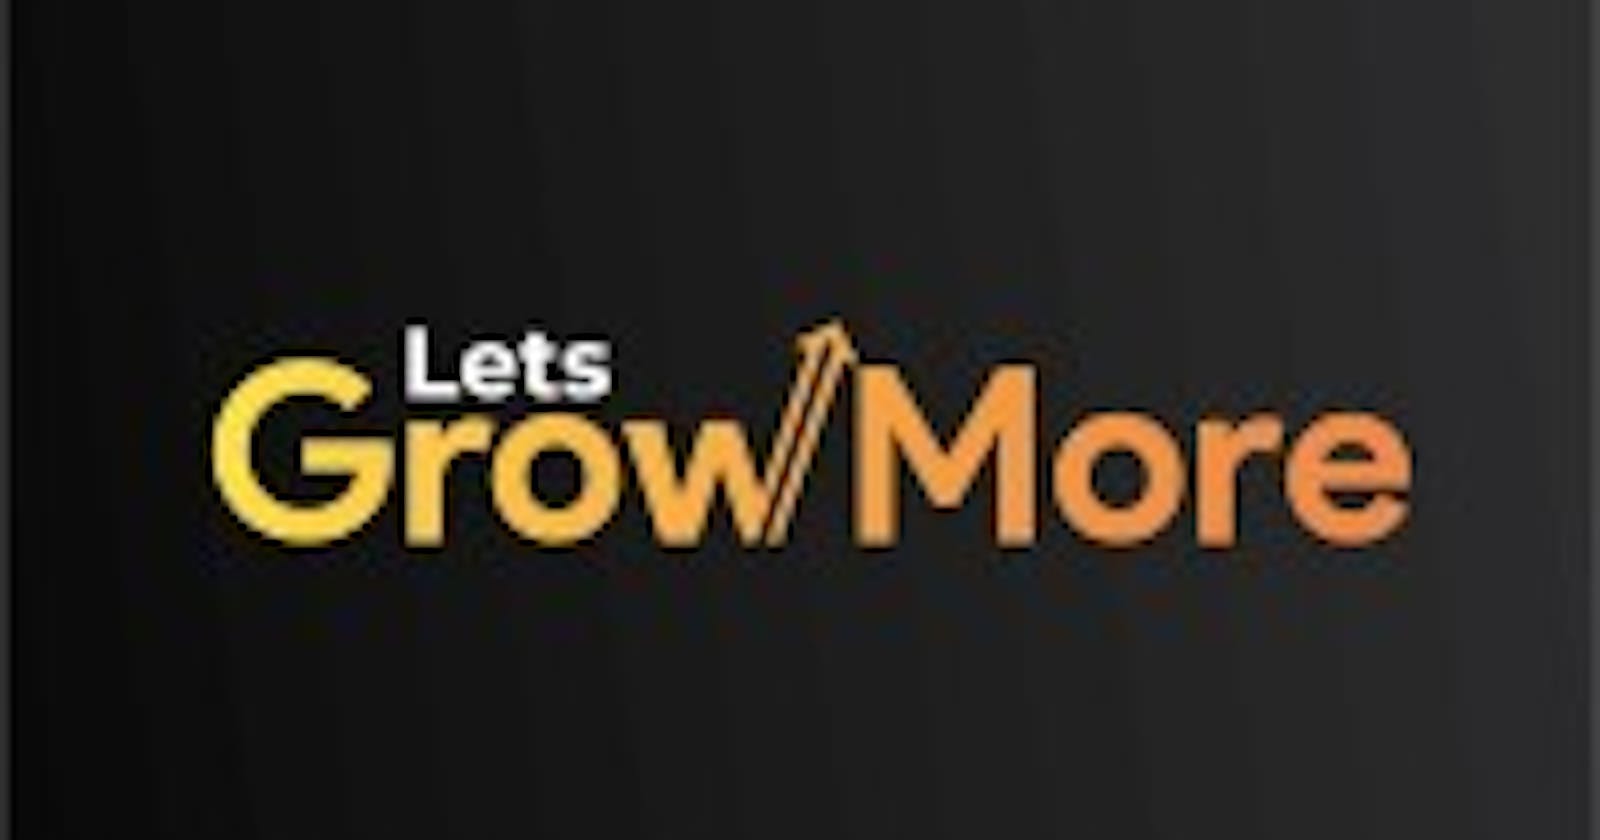 Working On DataScience With LetsGrowMore